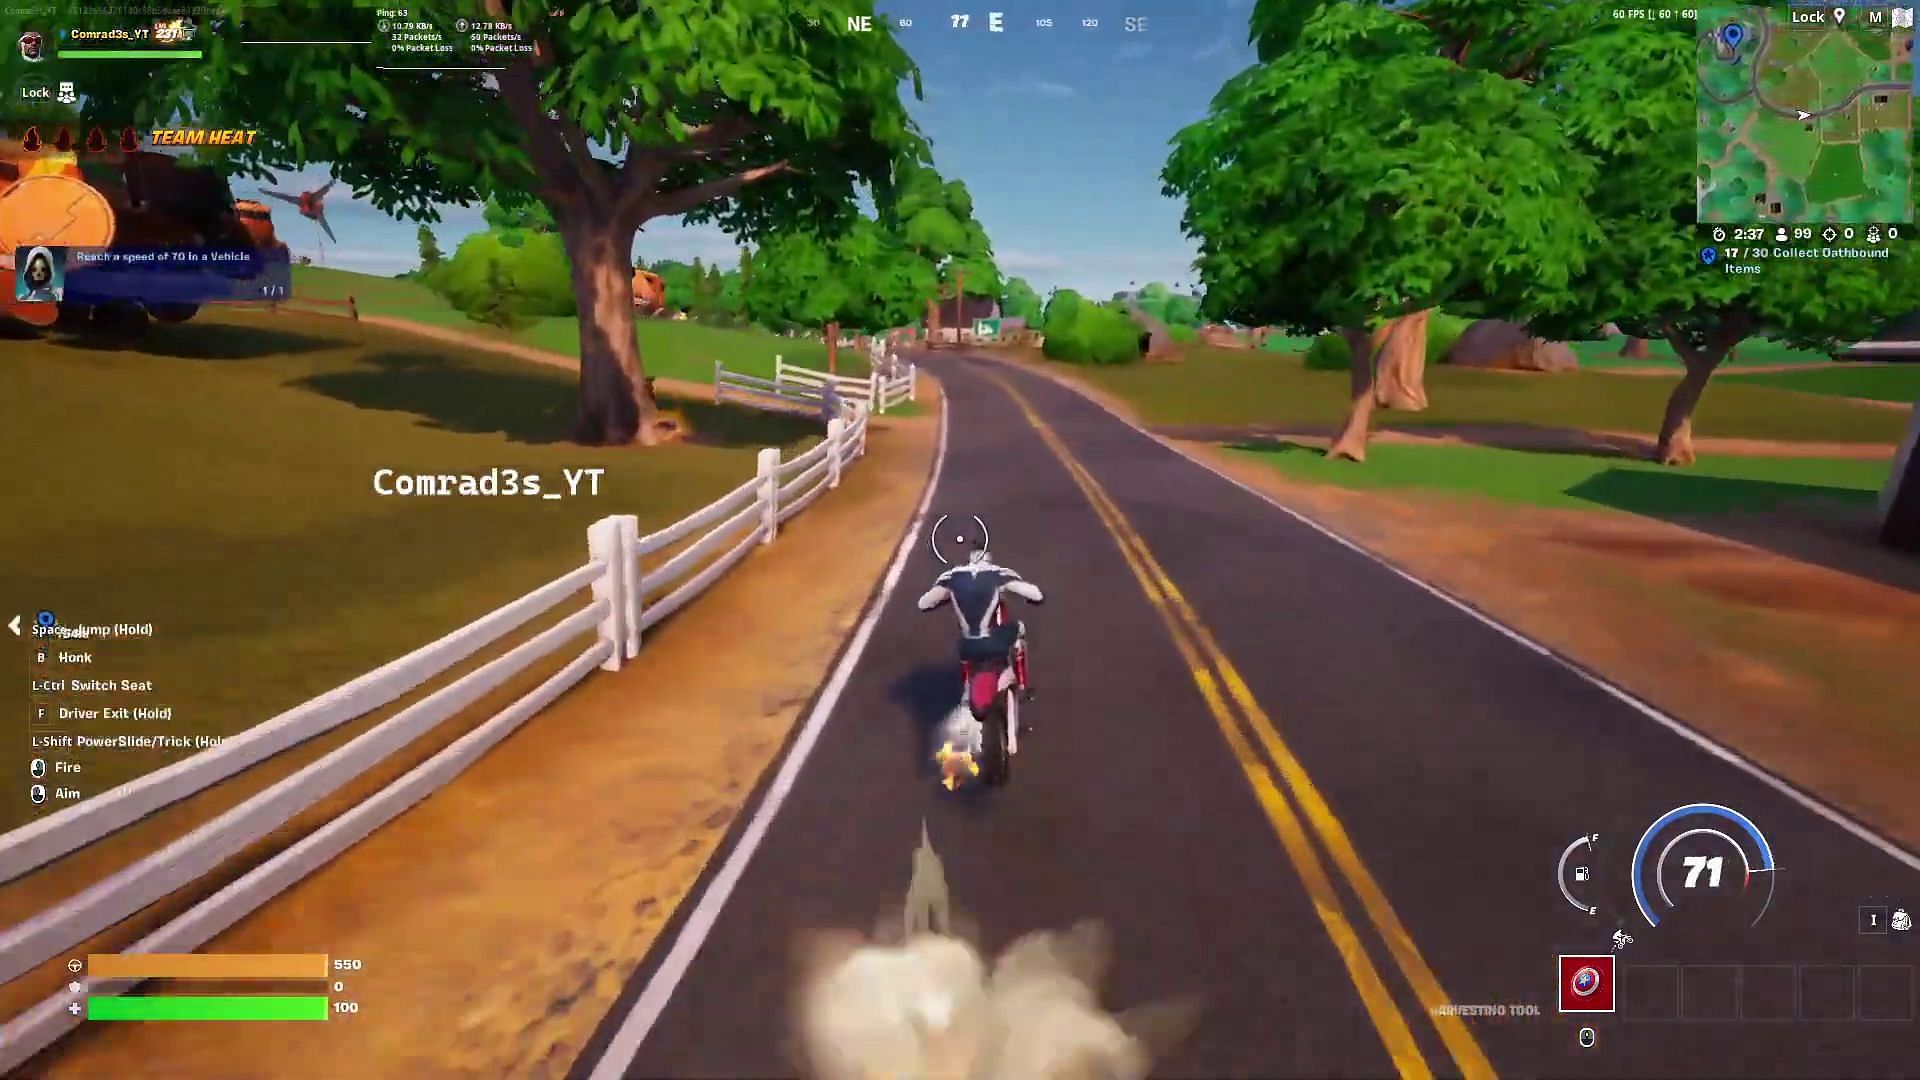 Drive the Dirt Bike on the road to reach 70 mph easily. (Image via YouTube/Comrad3s)